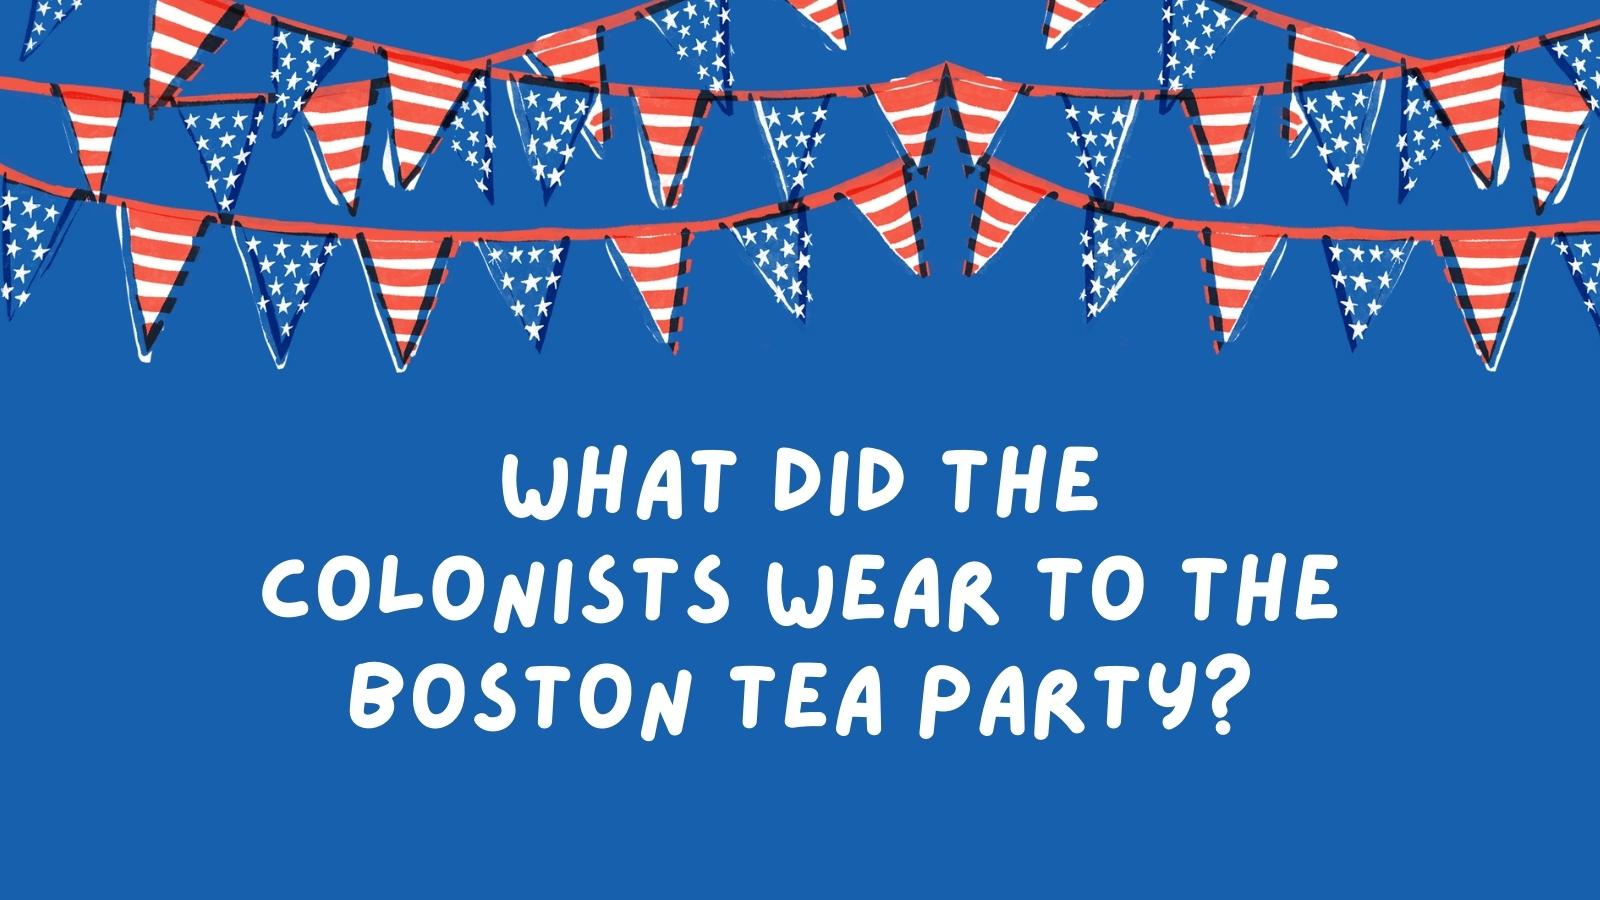 July 4th Jokes Feature